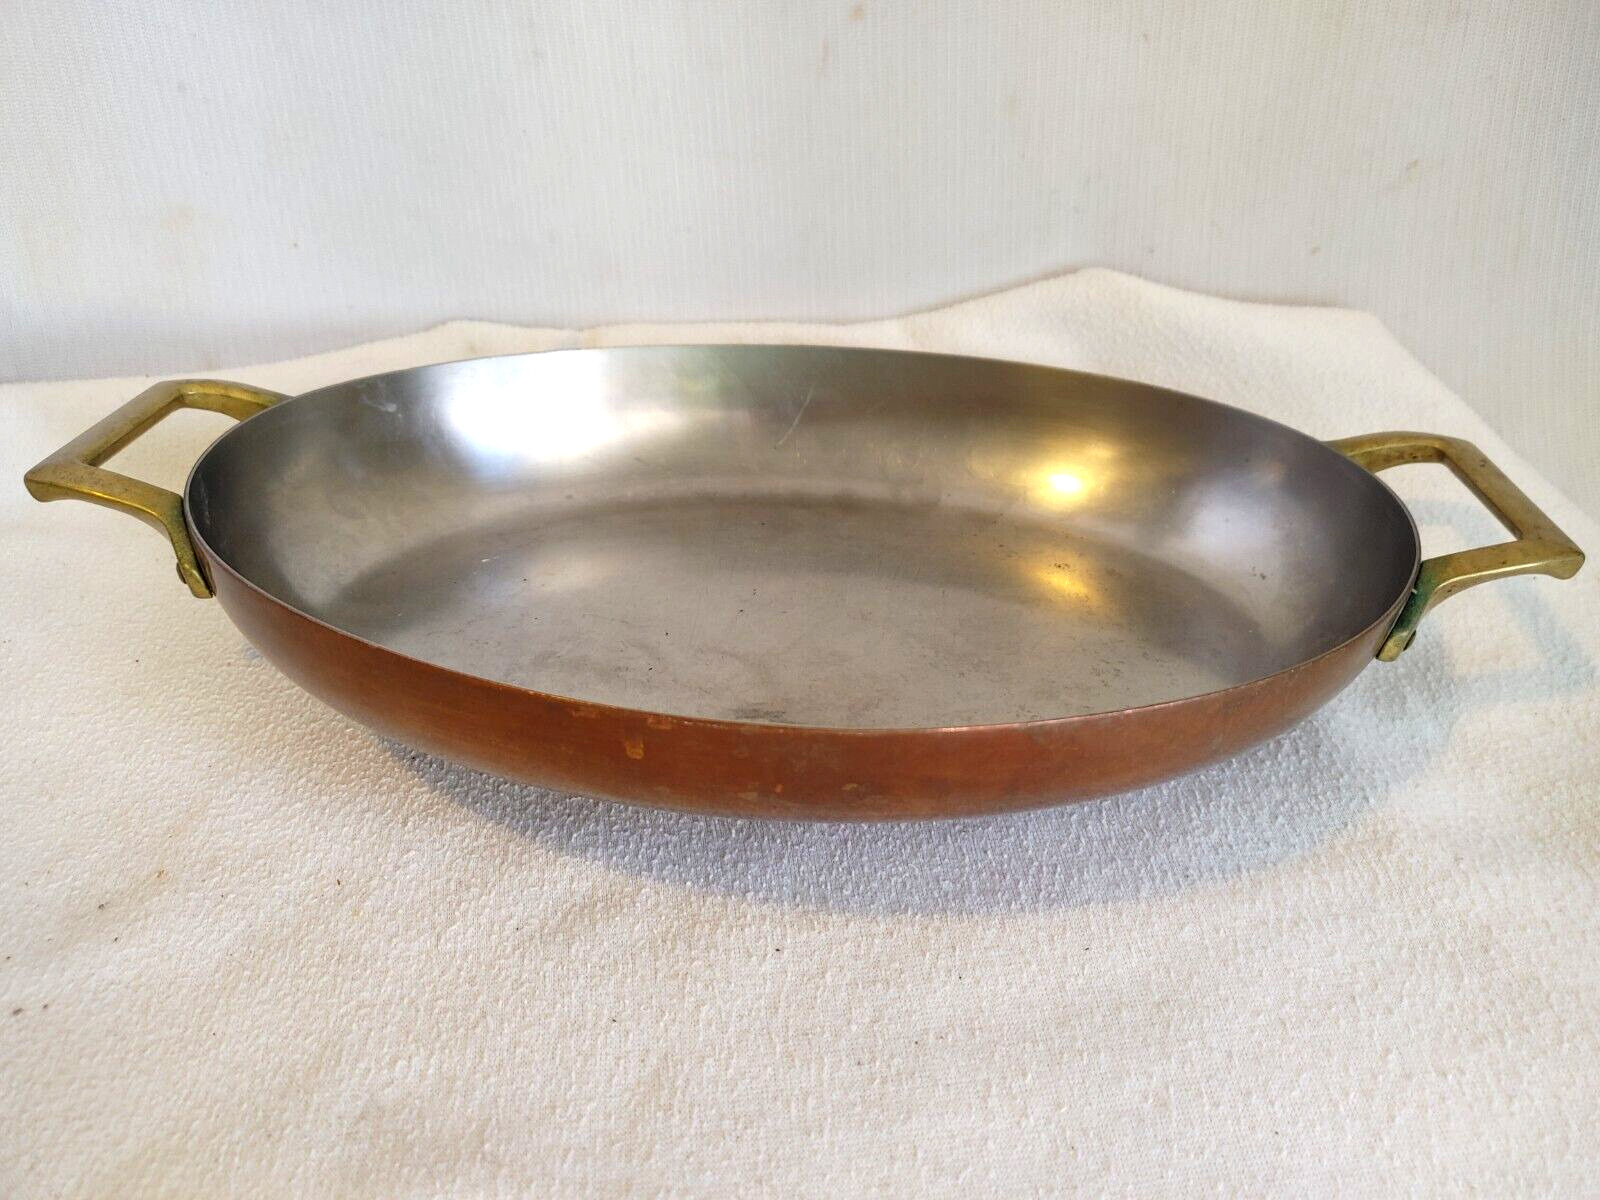 PAUL REVERE LIMITED EDITION STAINLESS LINED COPPER AU GRATIN PAN BRASS HANDLES